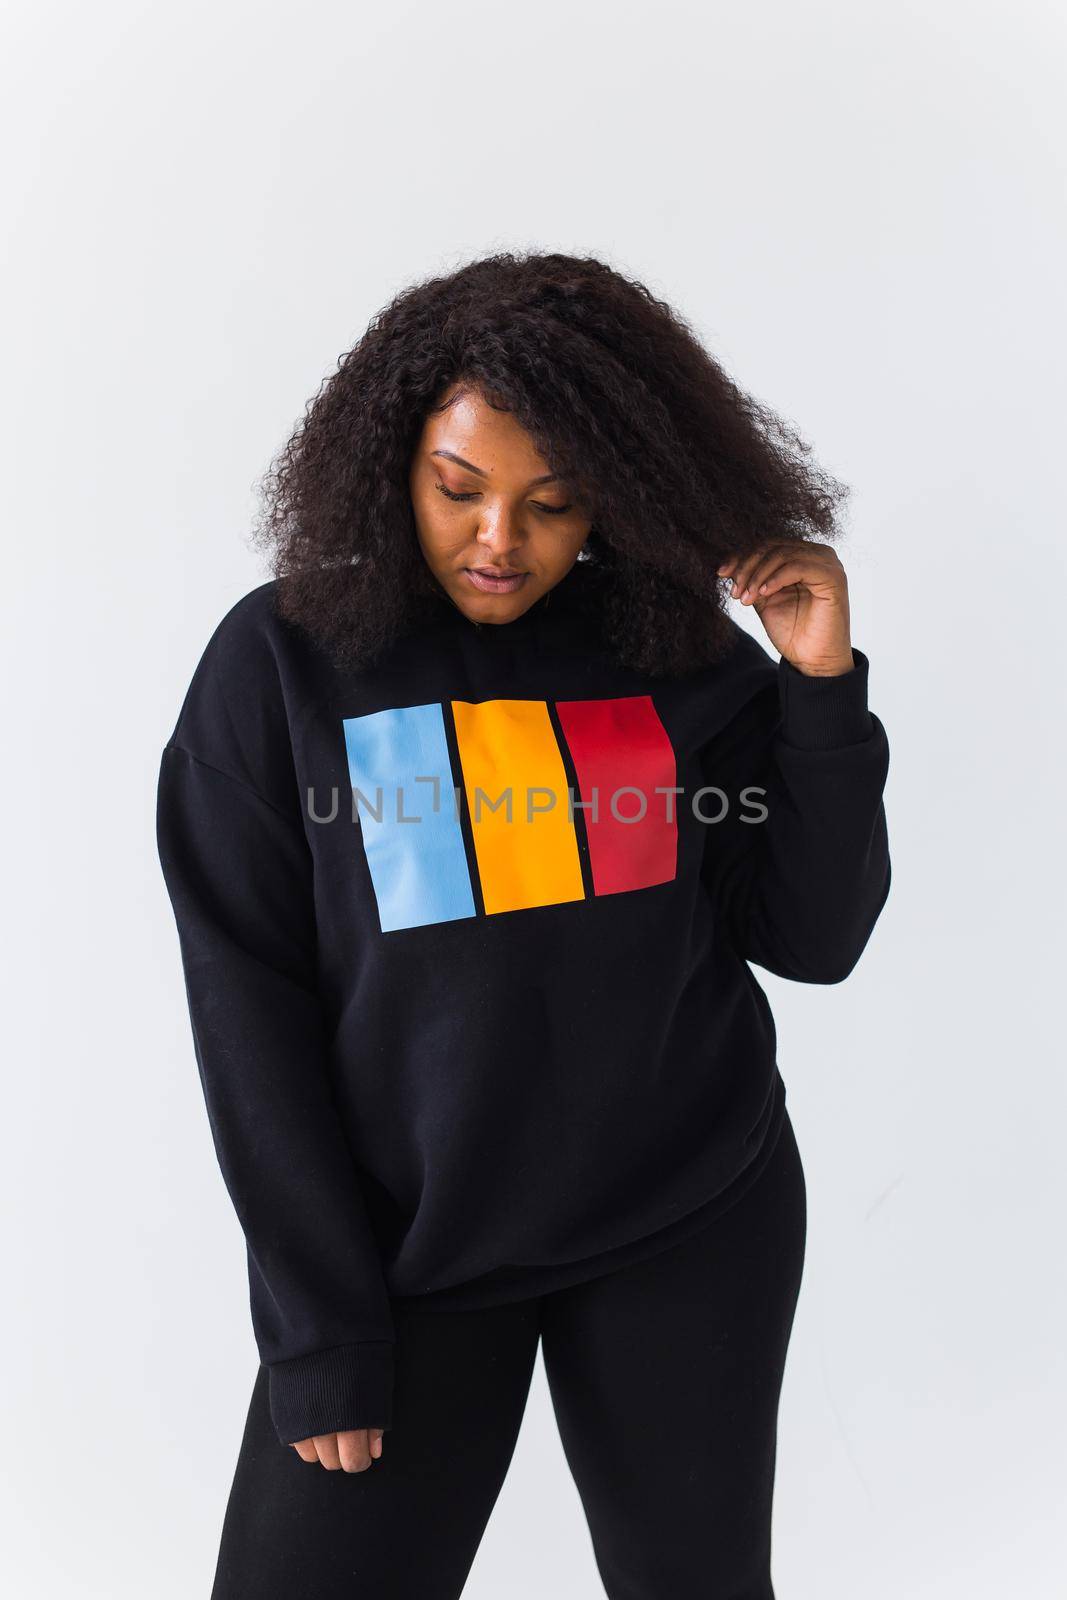 Youth street fashion concept - Portrait of confident sexy black woman in stylish sweatshirt on white background. by Satura86